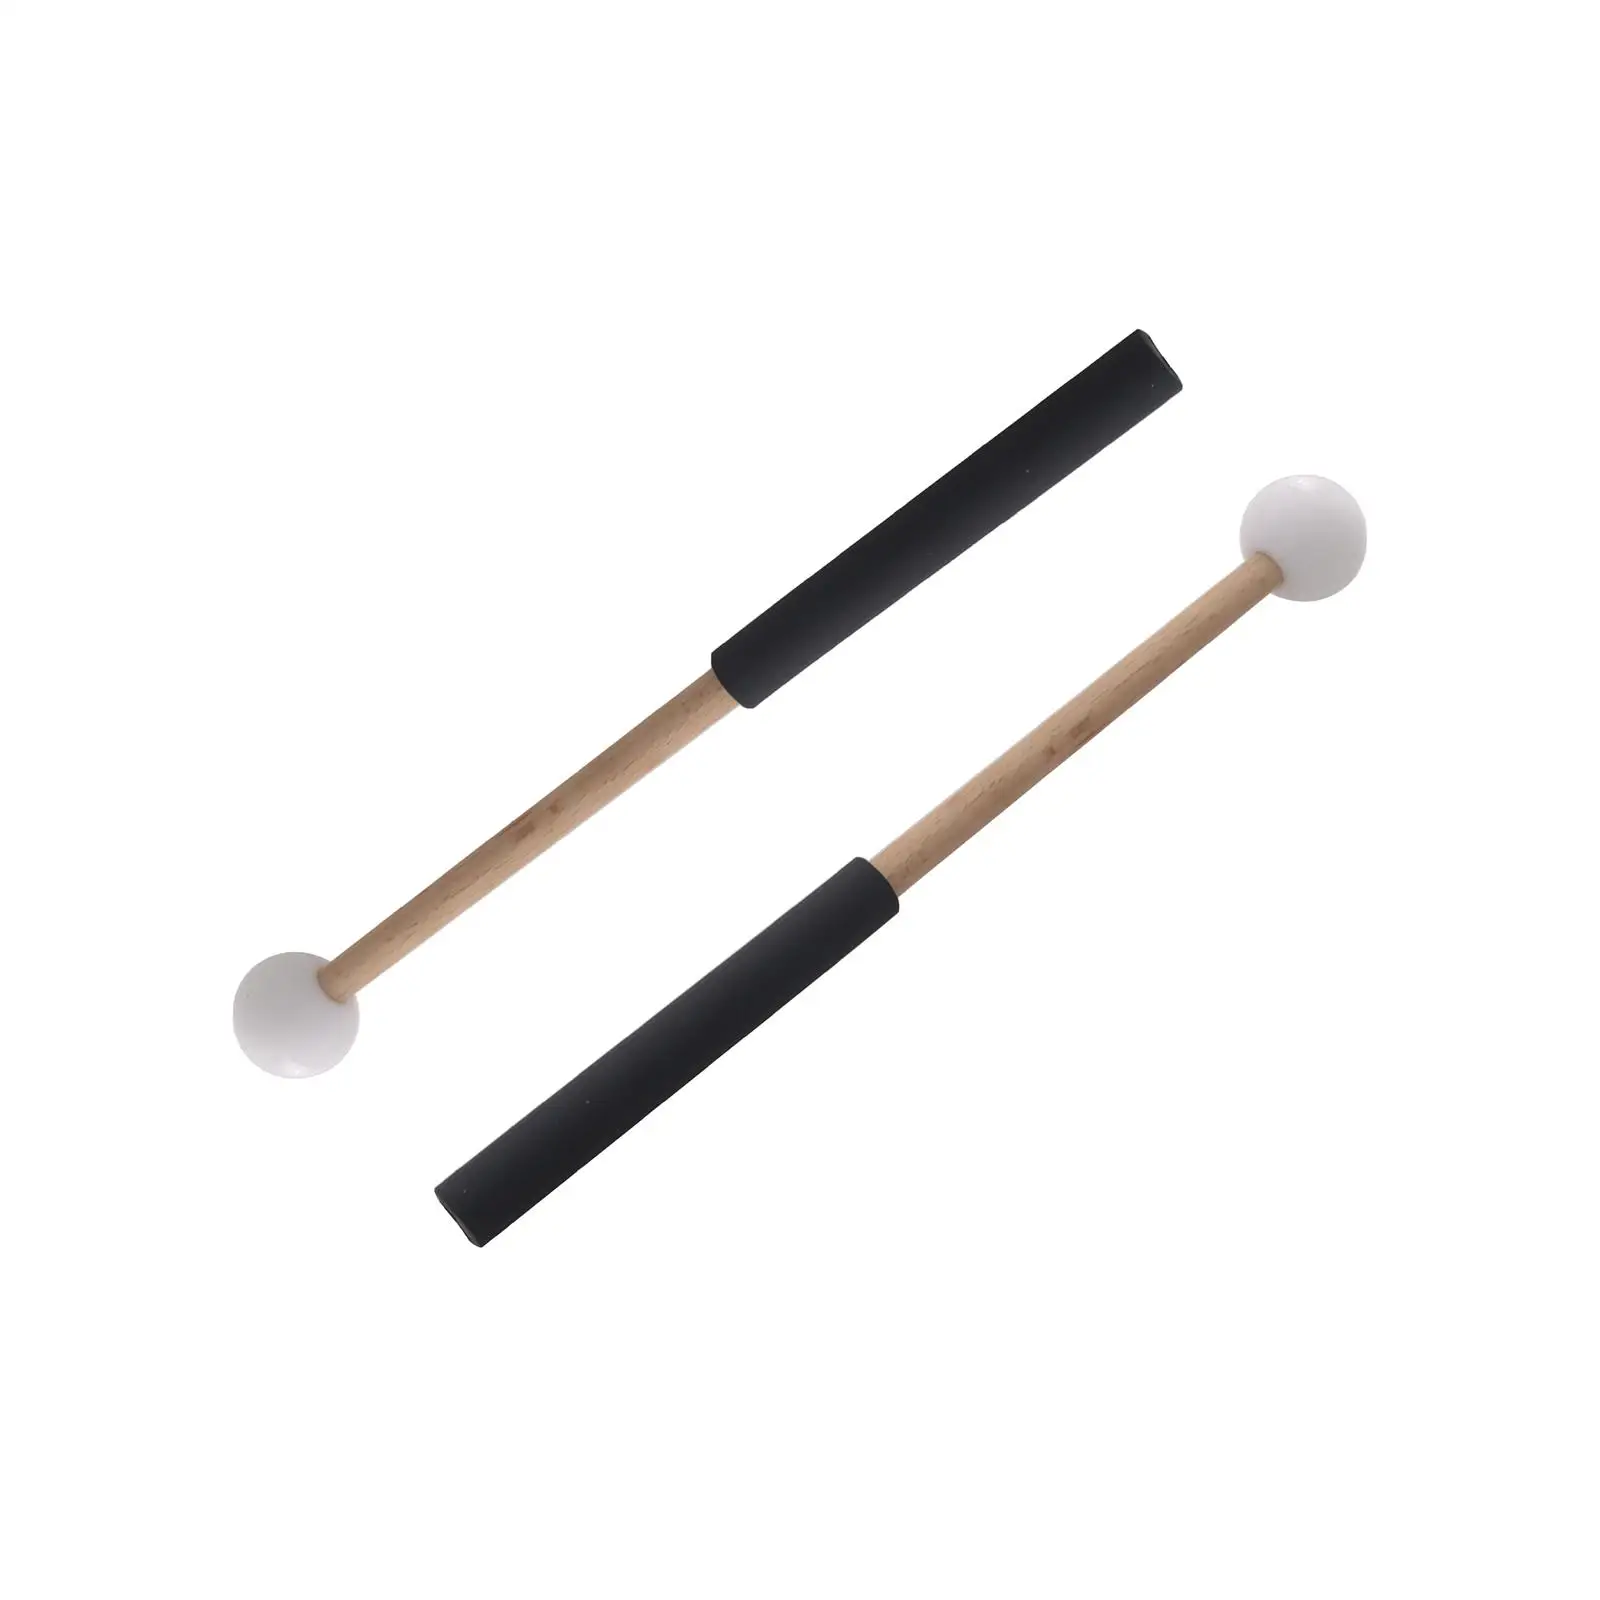 2 Pieces Rubber Mallet Percussion Musical Drumstick Music Instrument Accessory Percussion Drumsticks for Carillon Xylophone Yoga